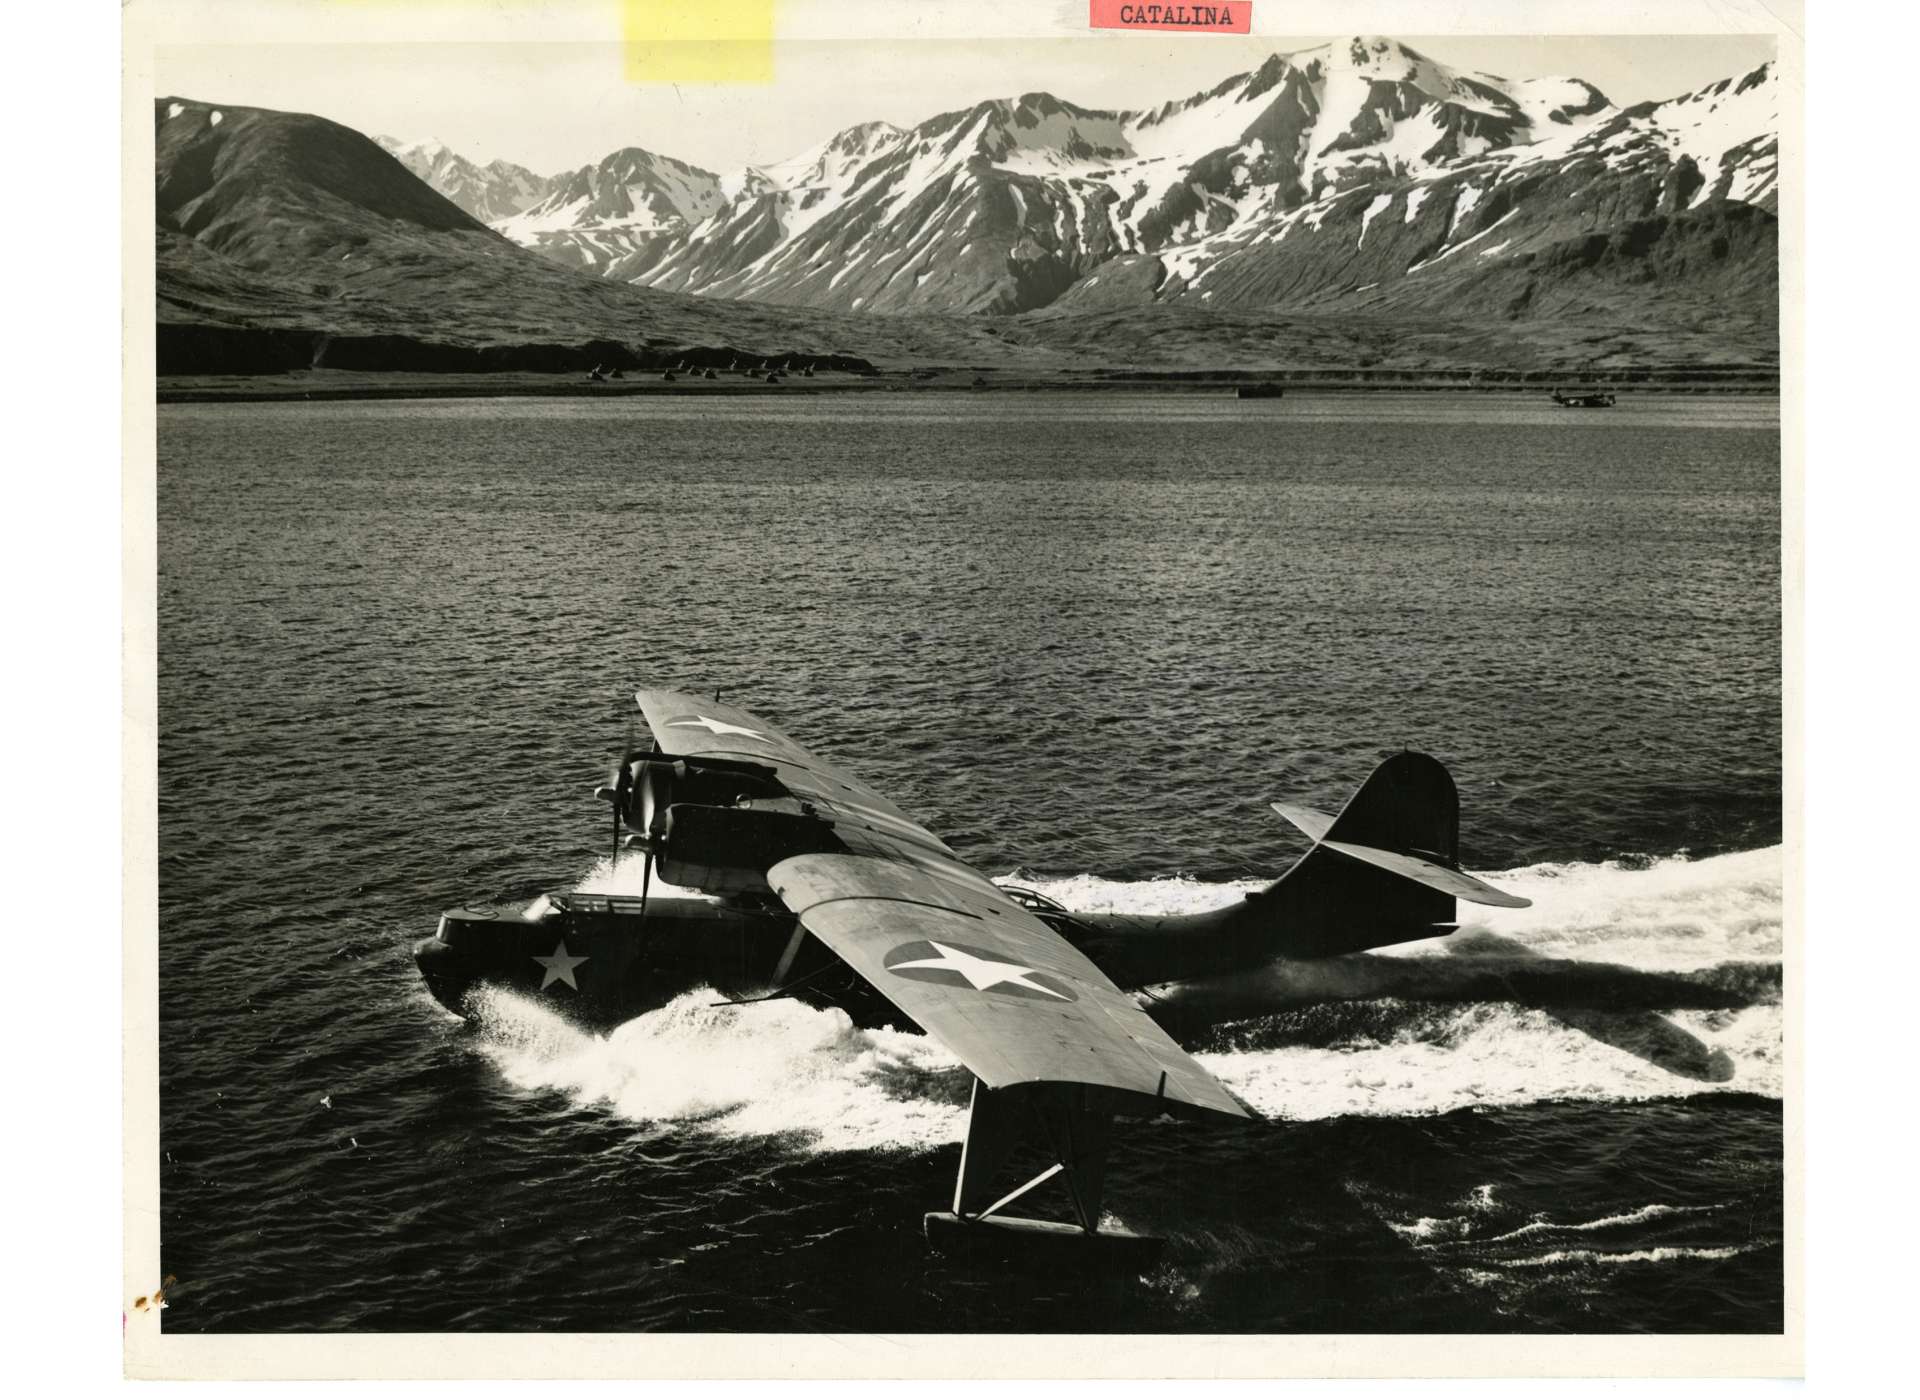 A PBY Catalina Flying Boat glides in for a landing. A similar aircraft was dispatched to Brooke’s Point, Palawan to fly seven Americans 850 miles over Japanese-held territory to General Douglas MacArthur’s headquarters on Morotai, an island south of the Philippines in the Dutch East Indies. US Navy Official Photograph, Gift of Charles Ives, from the Collection of The National World War II Museum, 2011.102.434.